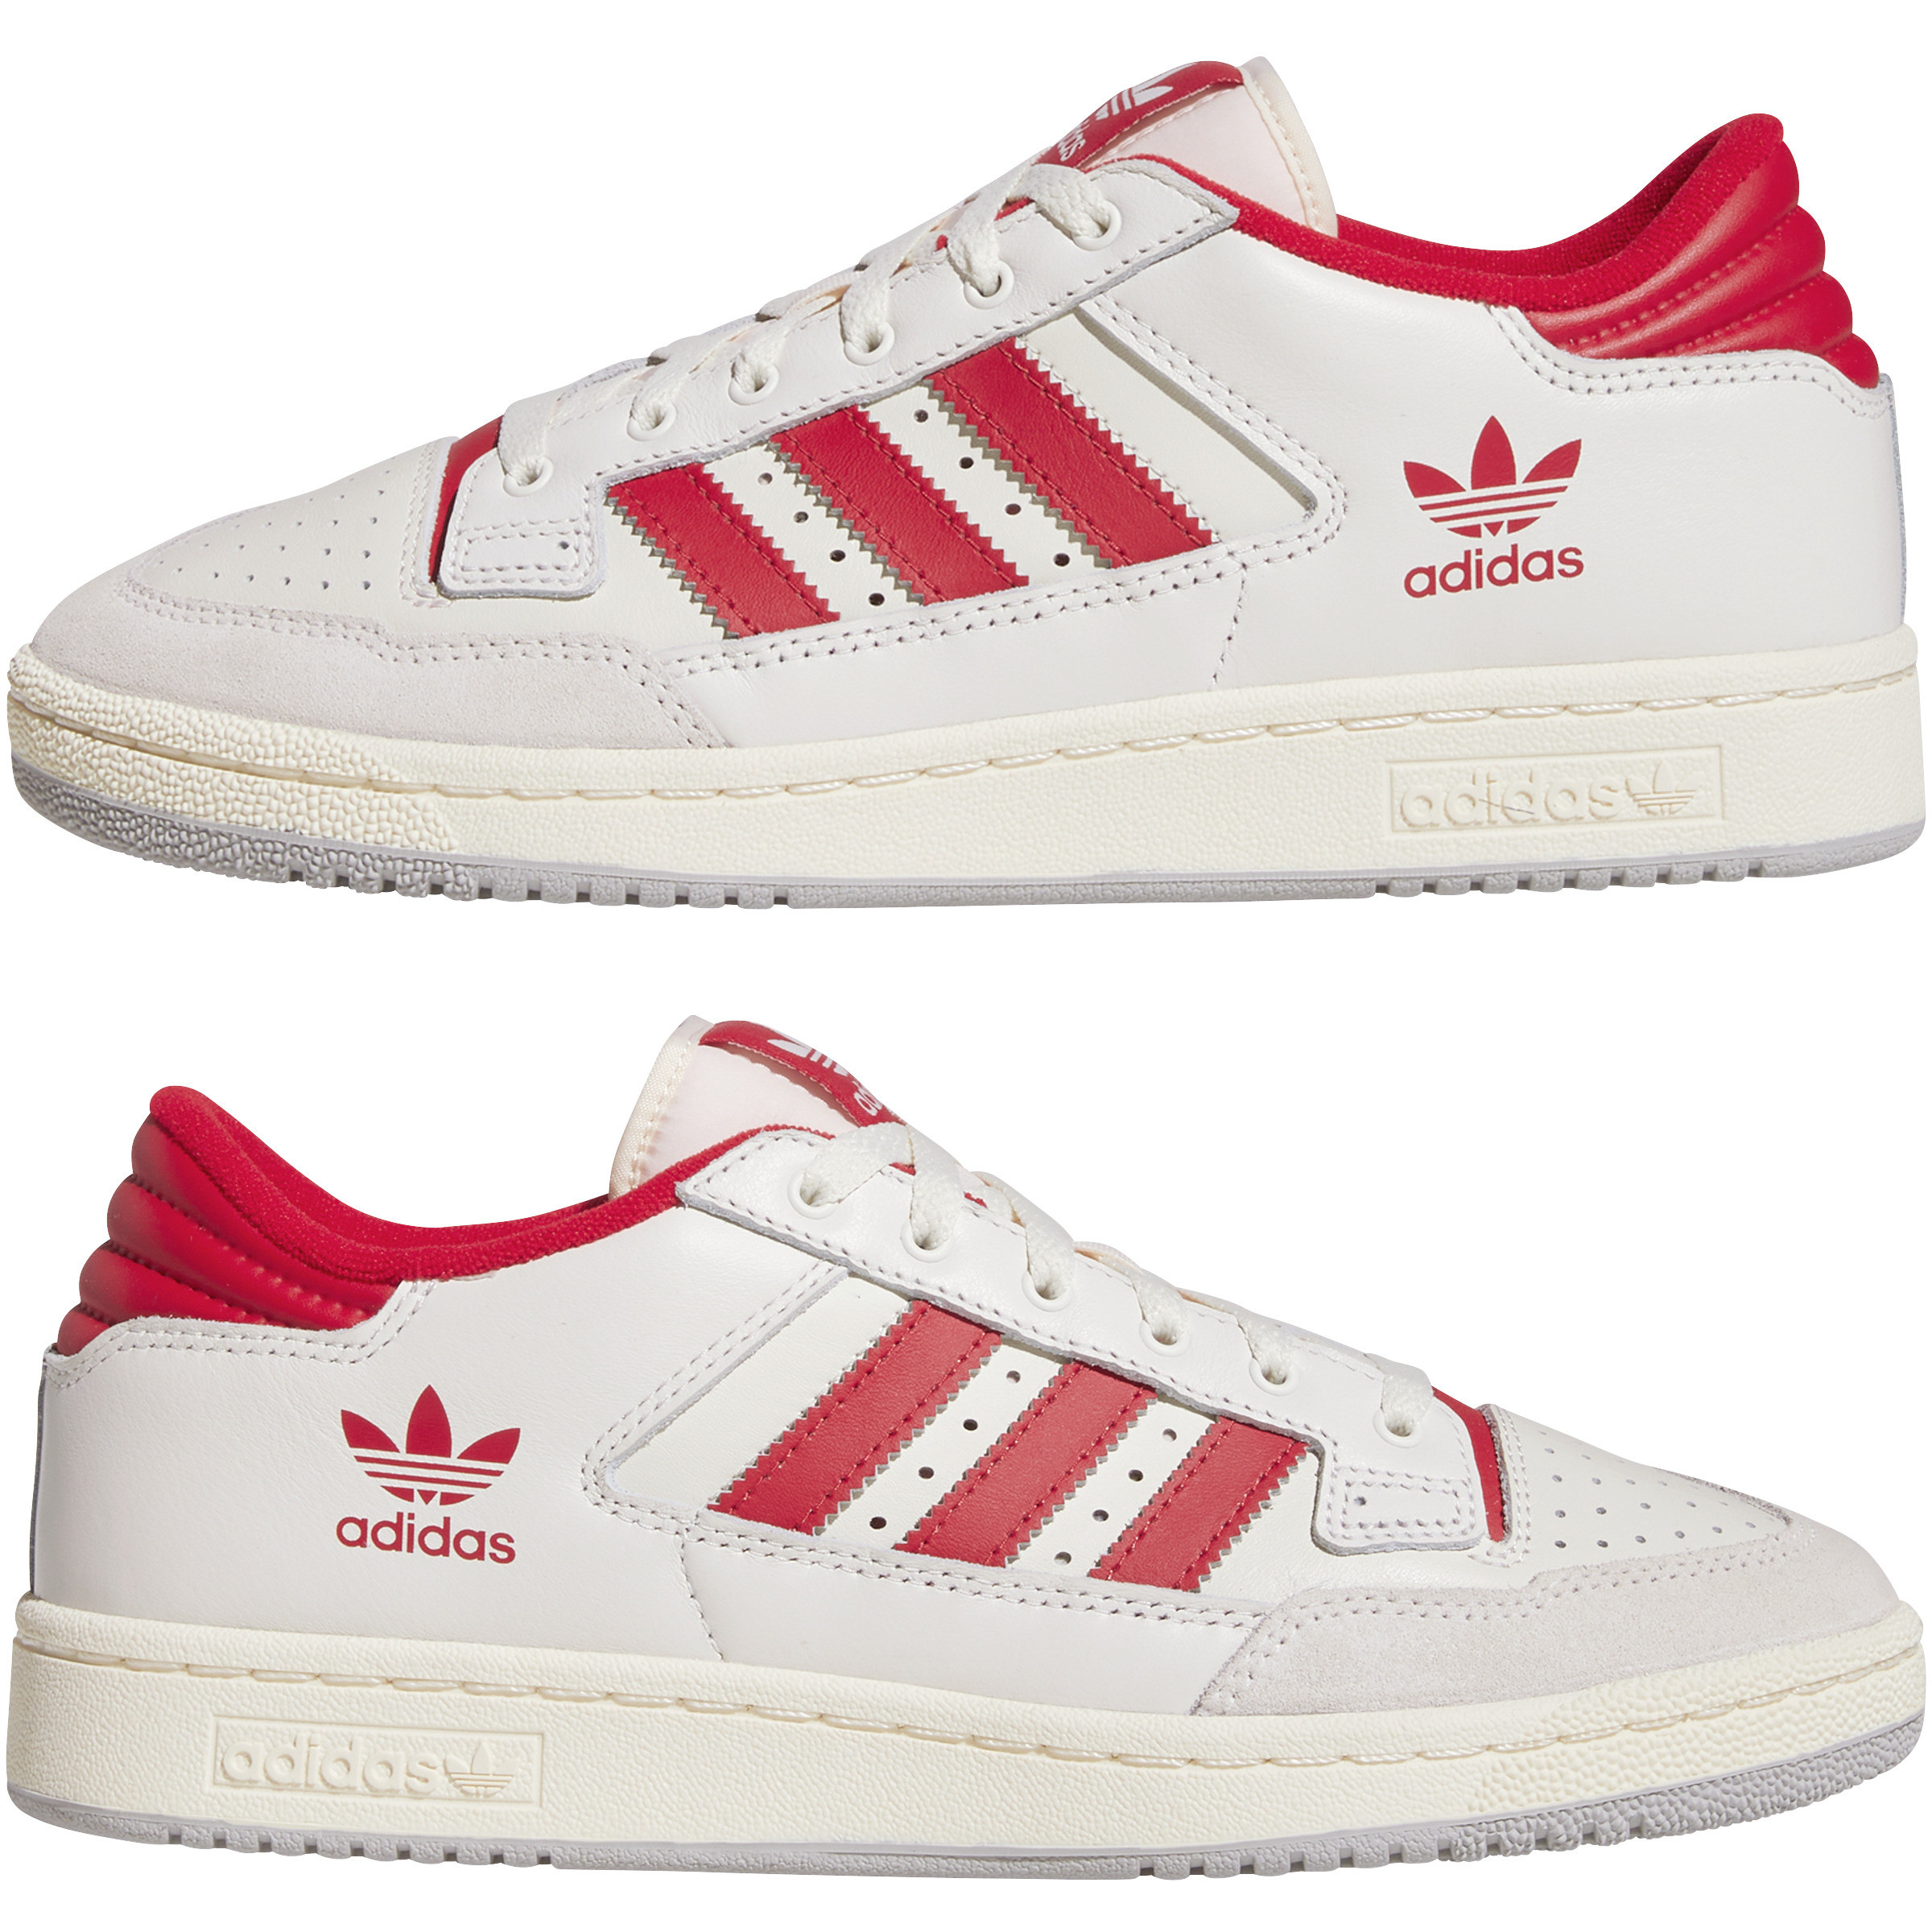 Adidas - Centennial 85 low shoes, White, large image number 7